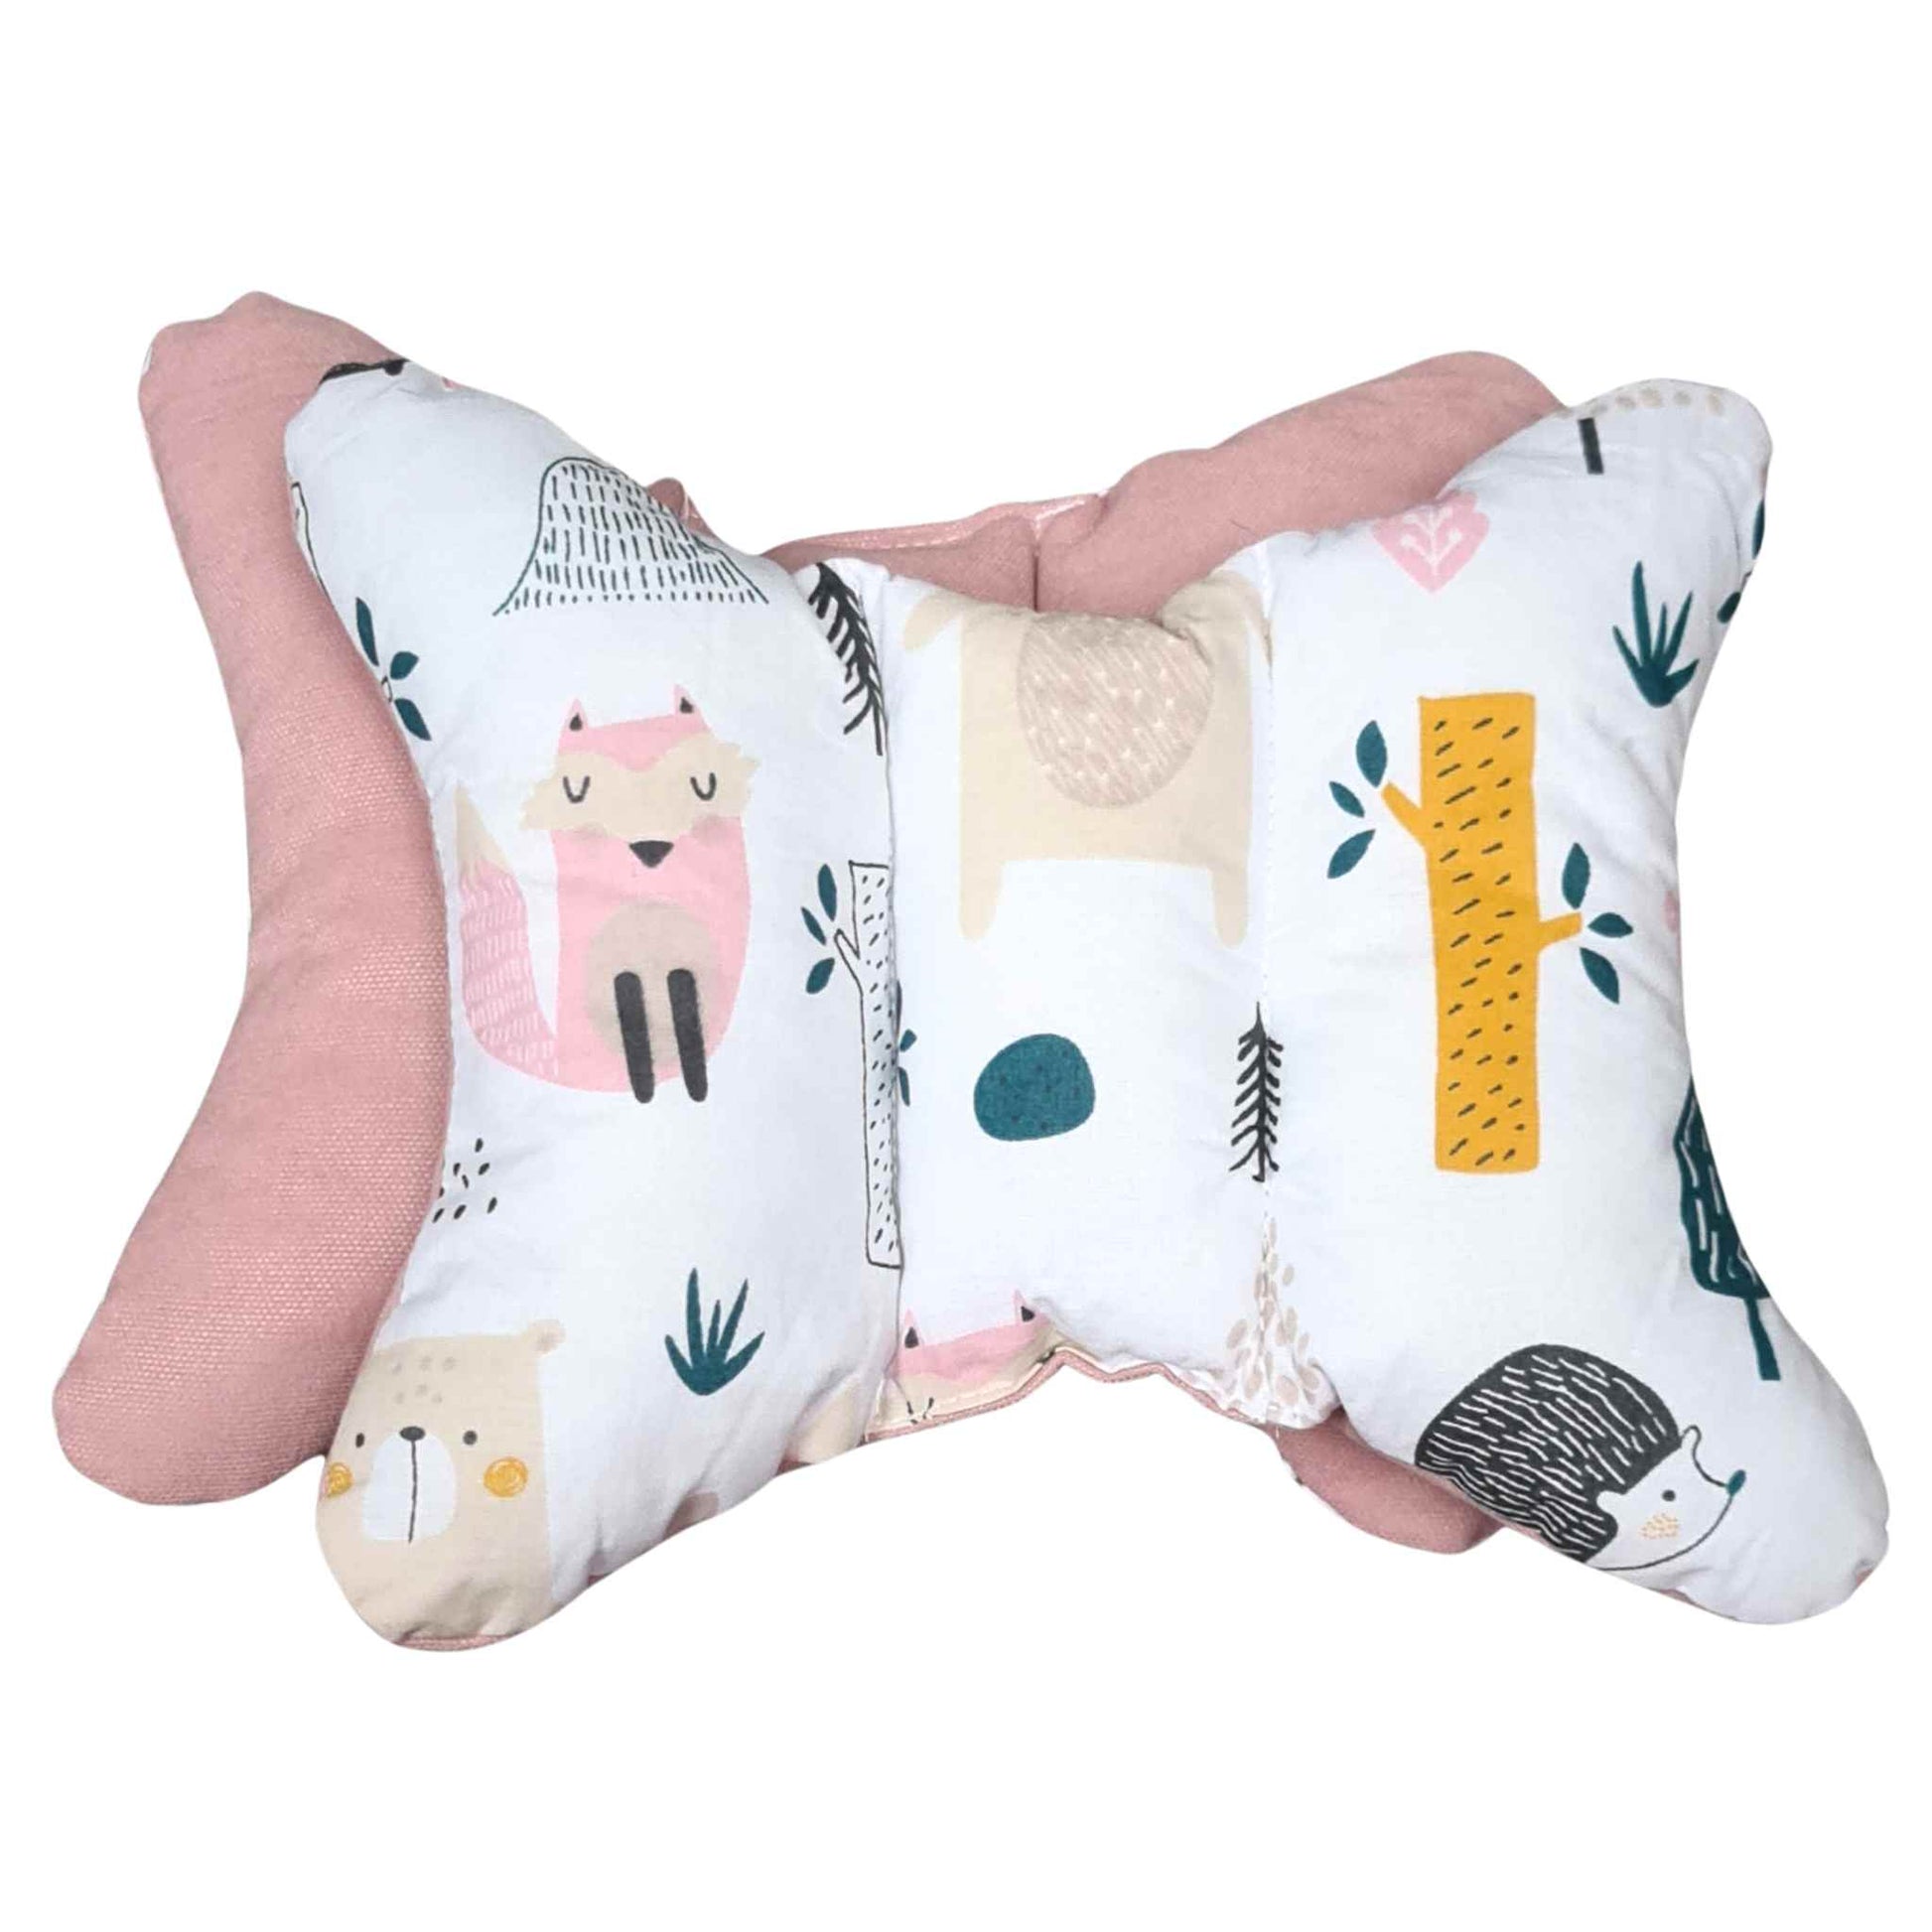 pink pillow for baby and toddler head support pillow butterfly shape with forest animal pattern